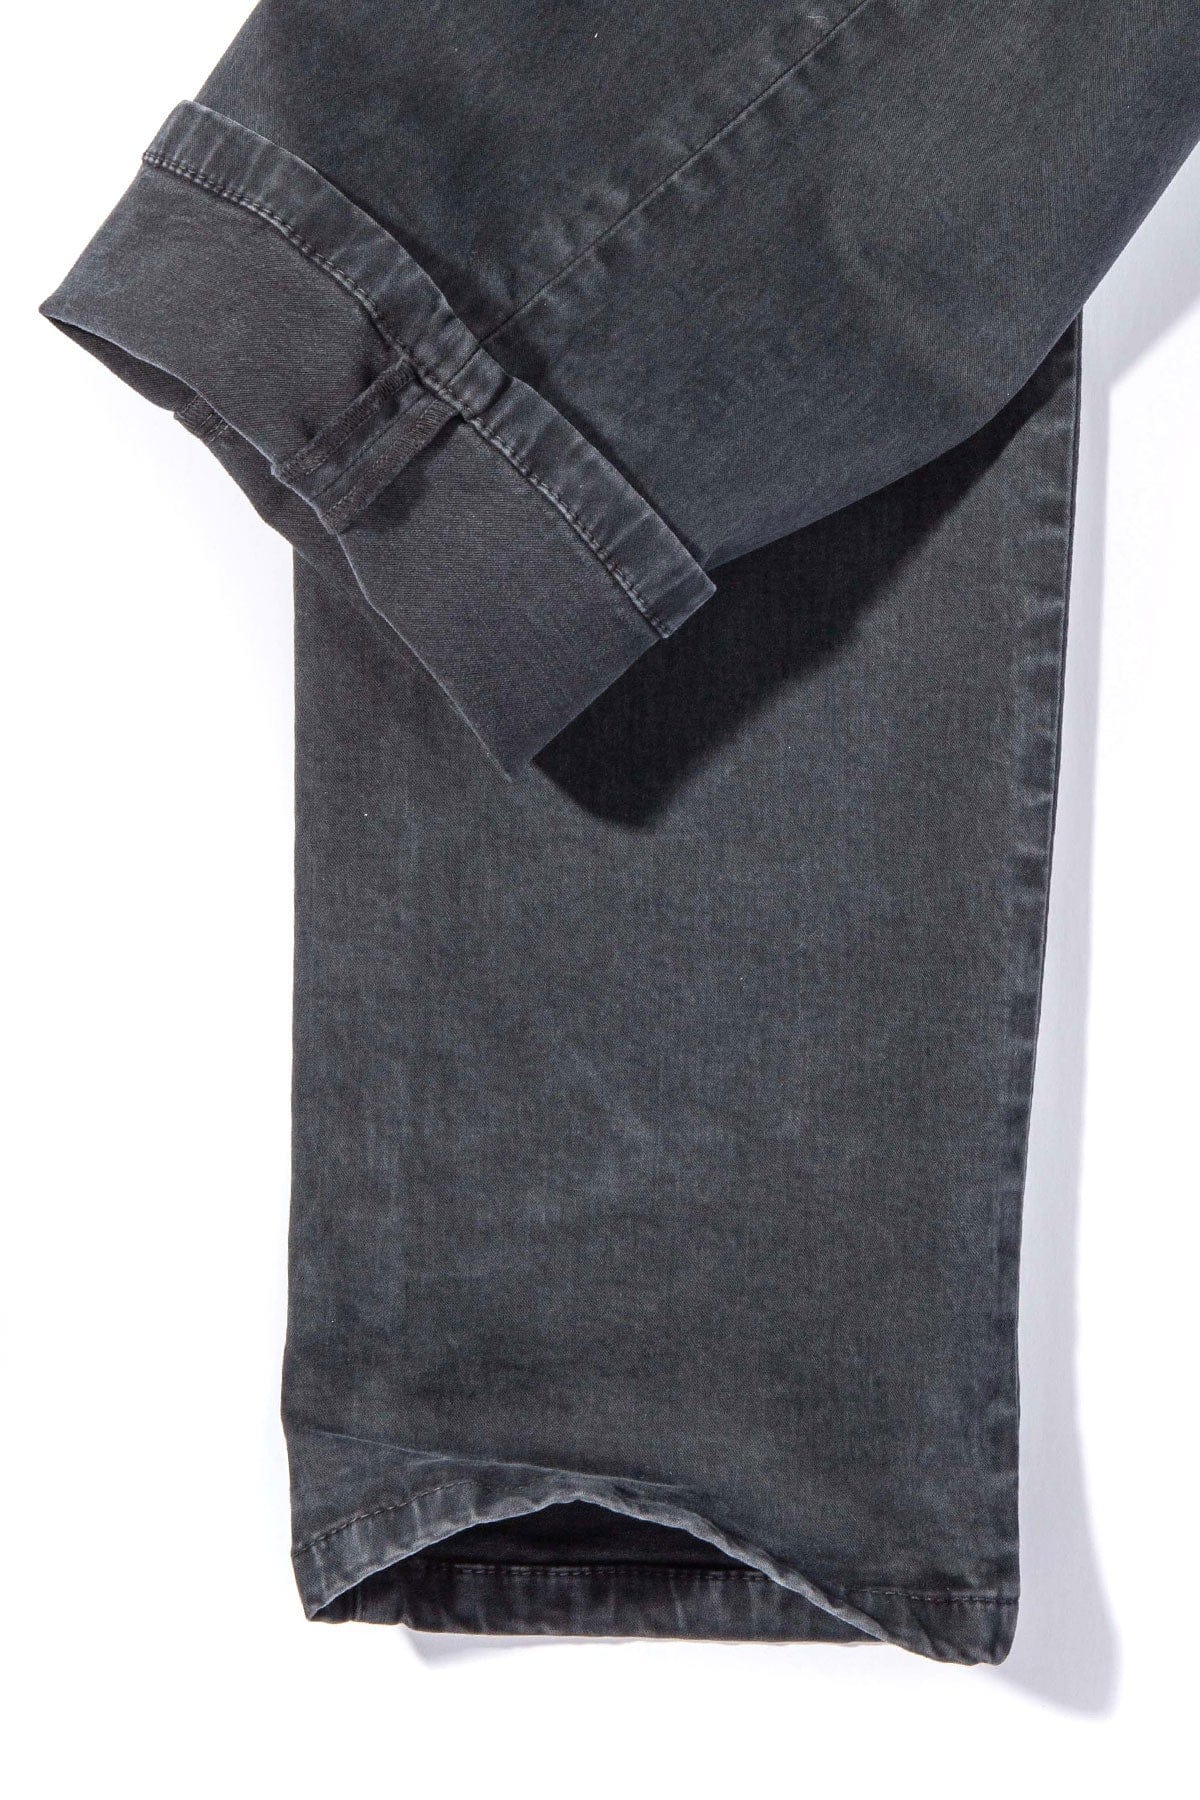 Ryland Rugged Soft Touch Cotton Jeans in Anthracite - AXEL'S